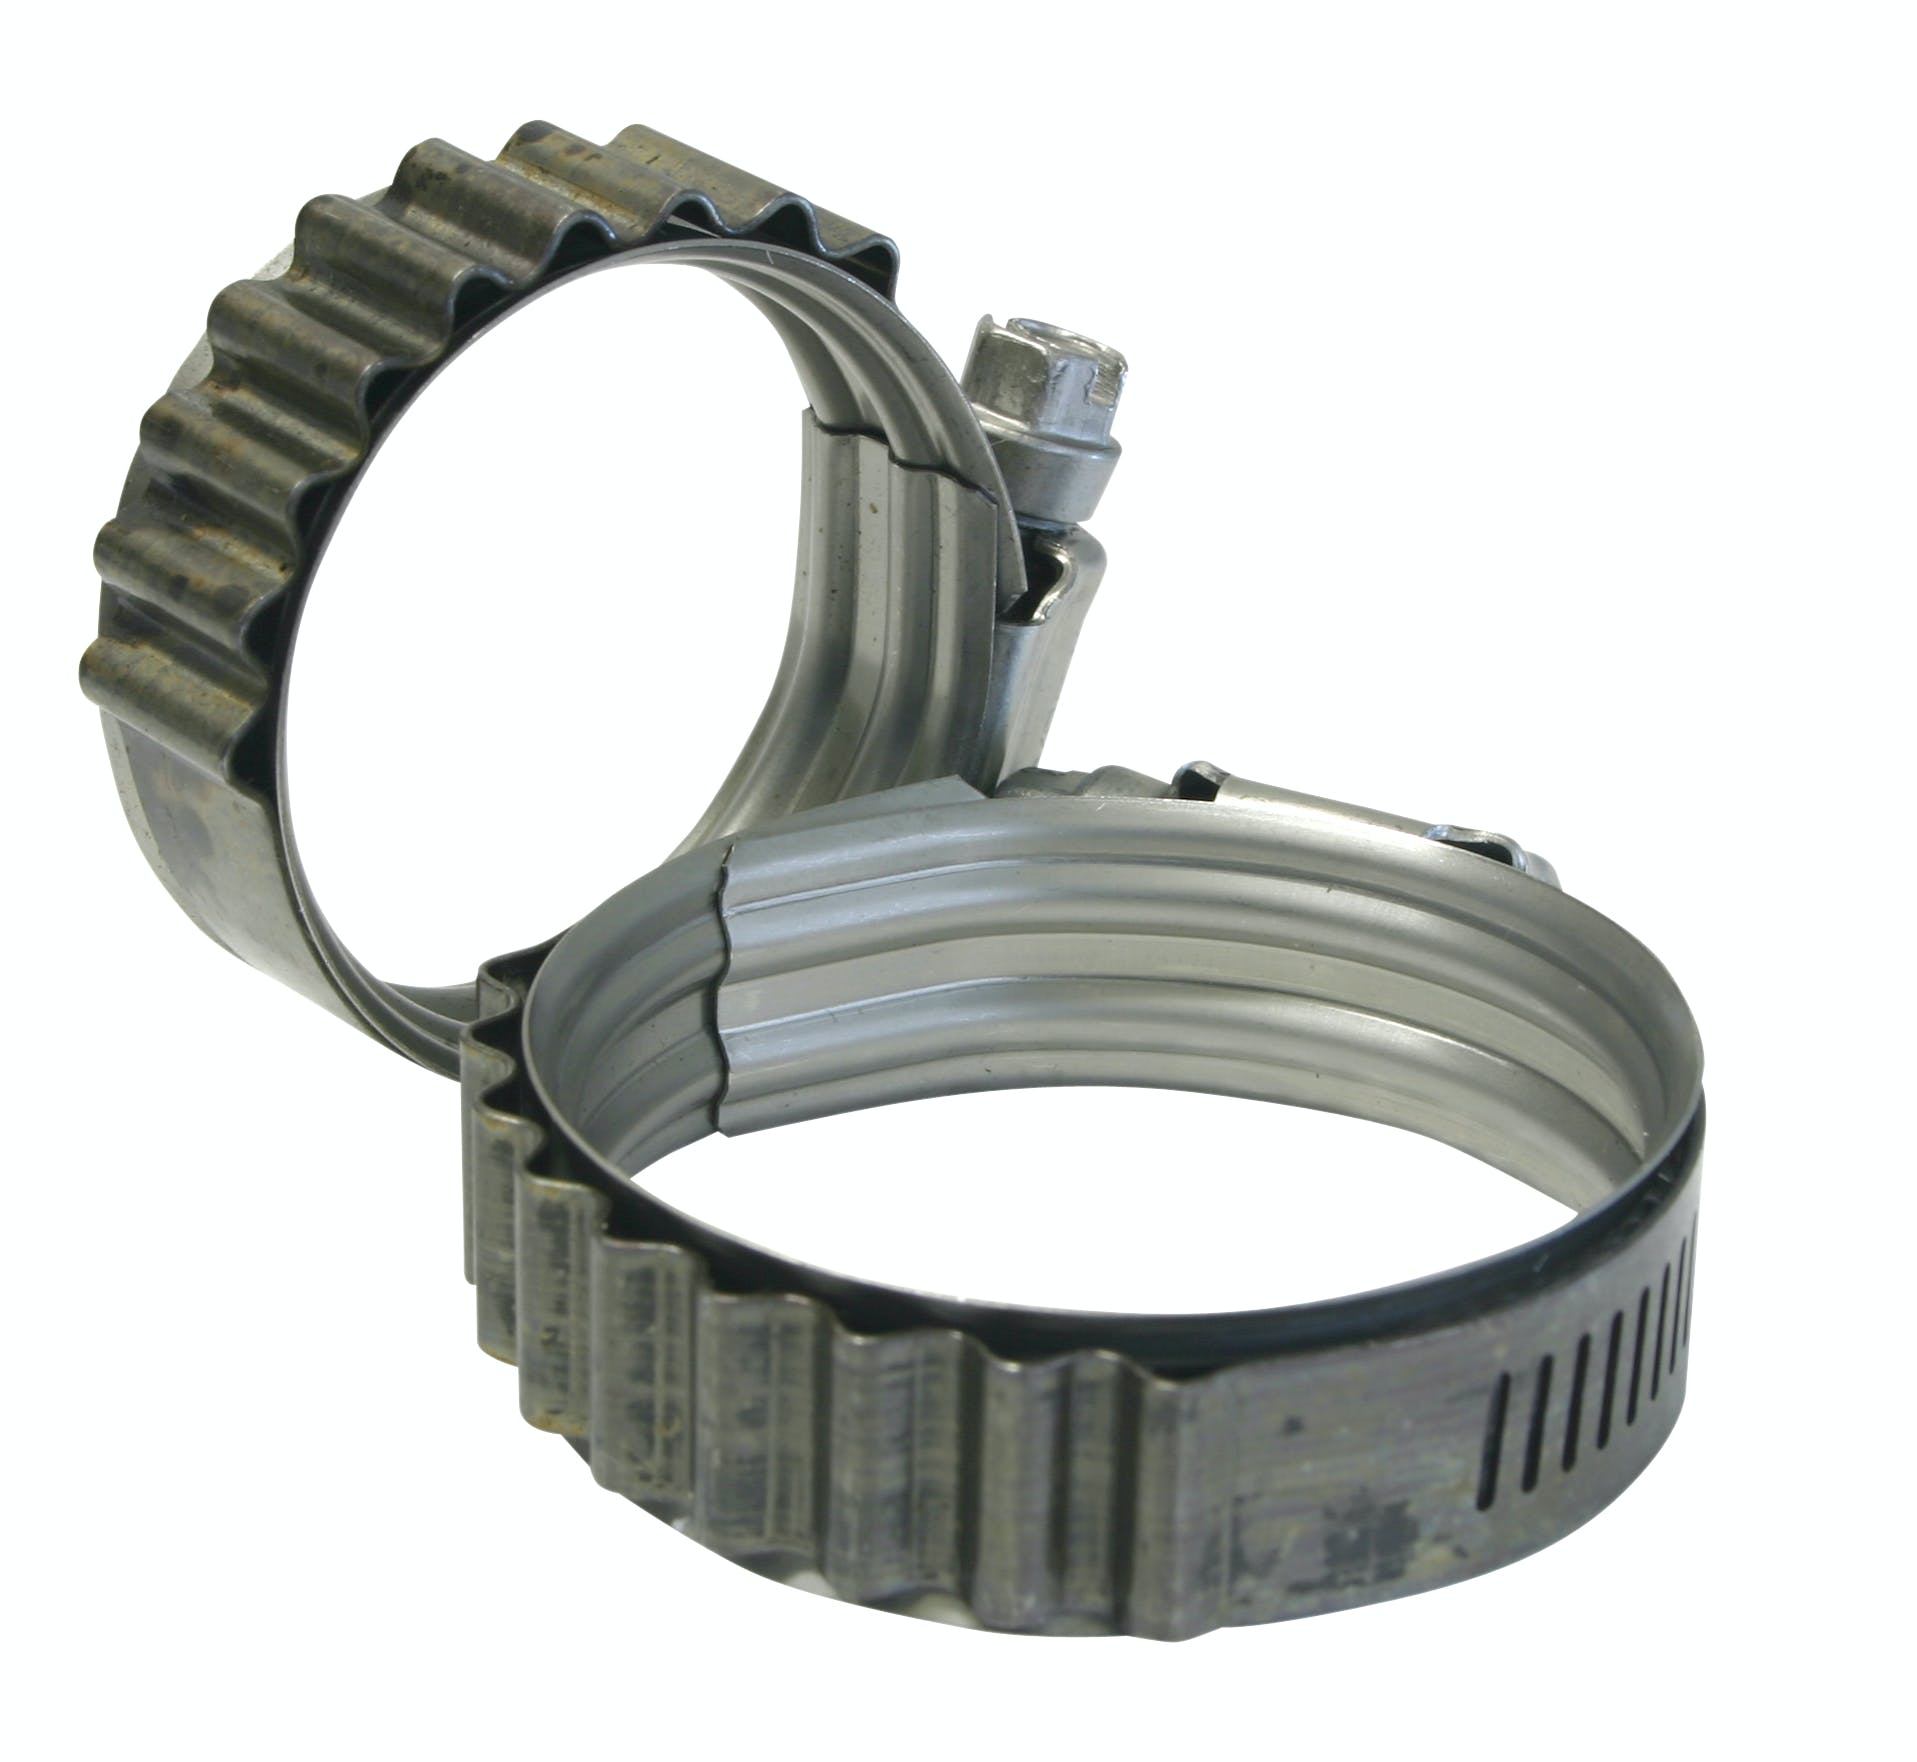 Turbosmart TS-HCT-M075 Turbo-Seal Constant Tension Clamps 2.500-3.375 inch